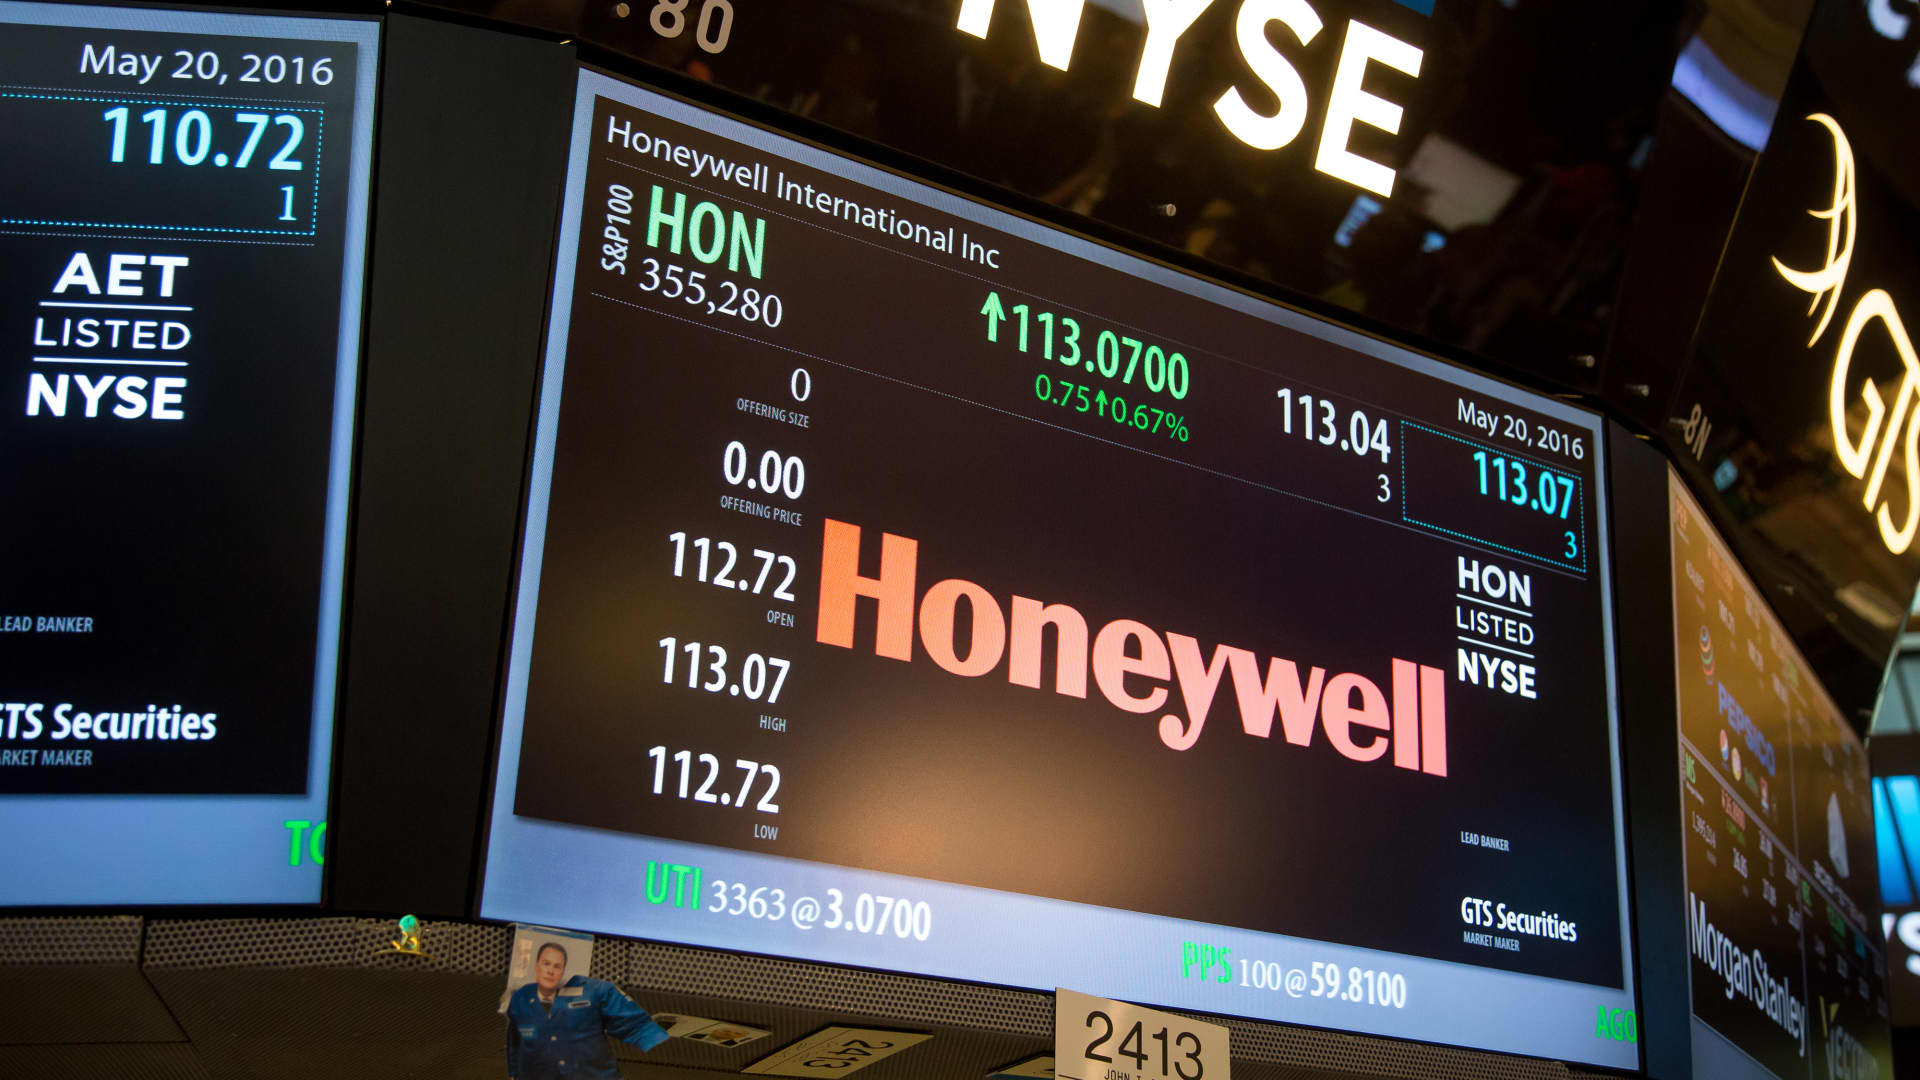 We're lowering our Honeywell price target after earnings. The risk-reward is still favorable